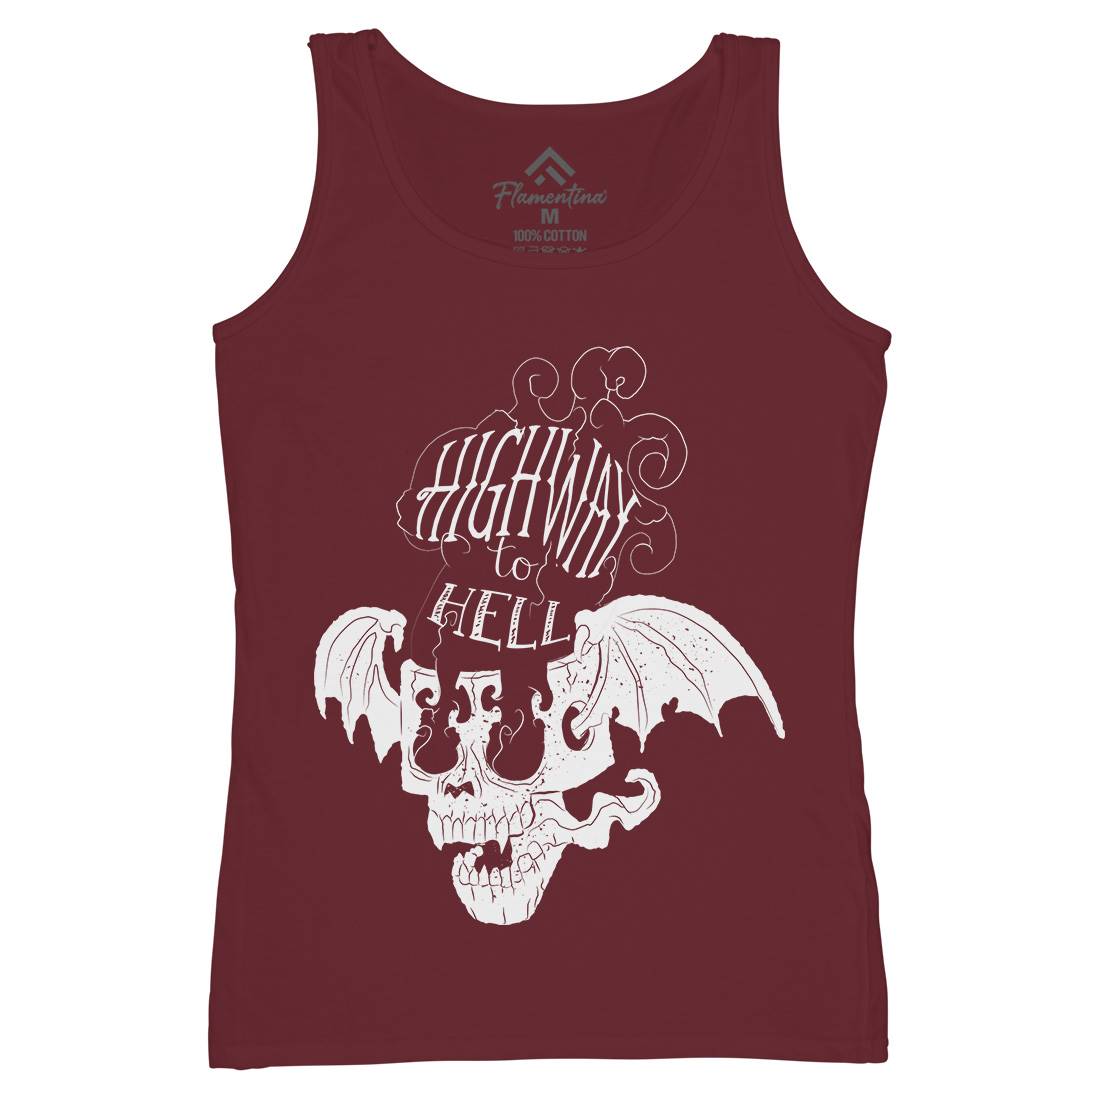 Highway To Hell Womens Organic Tank Top Vest Motorcycles A959